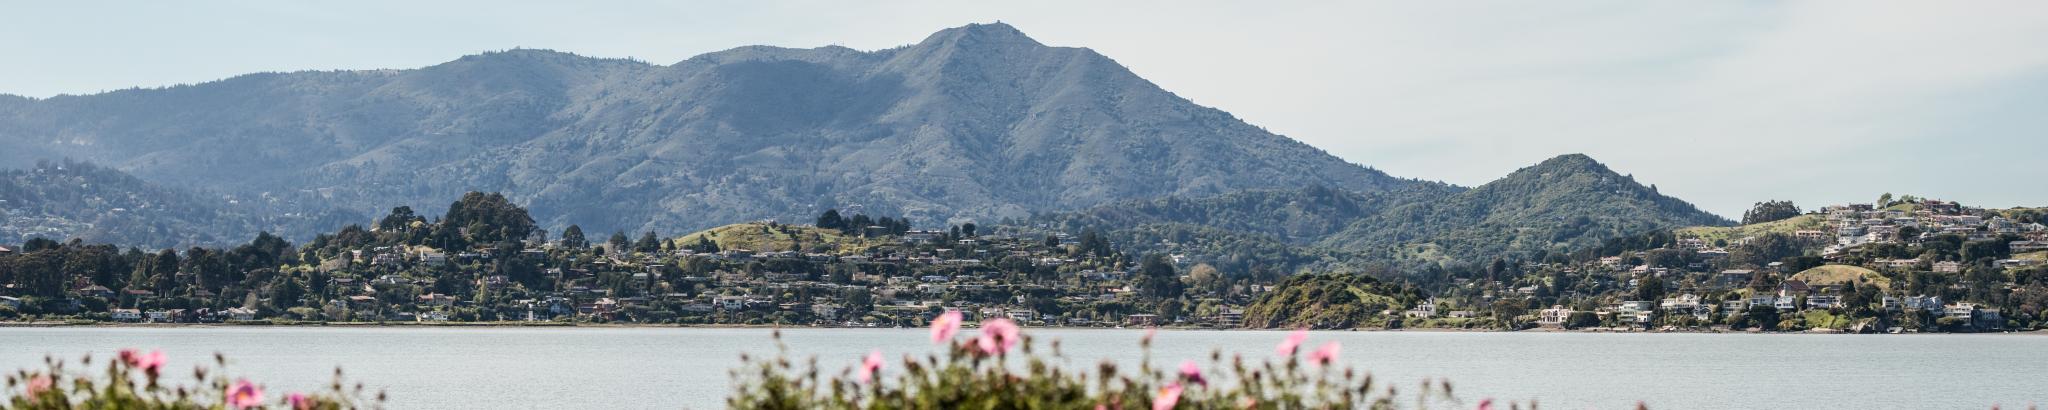 Profile of Mount Tam viewed from across the water